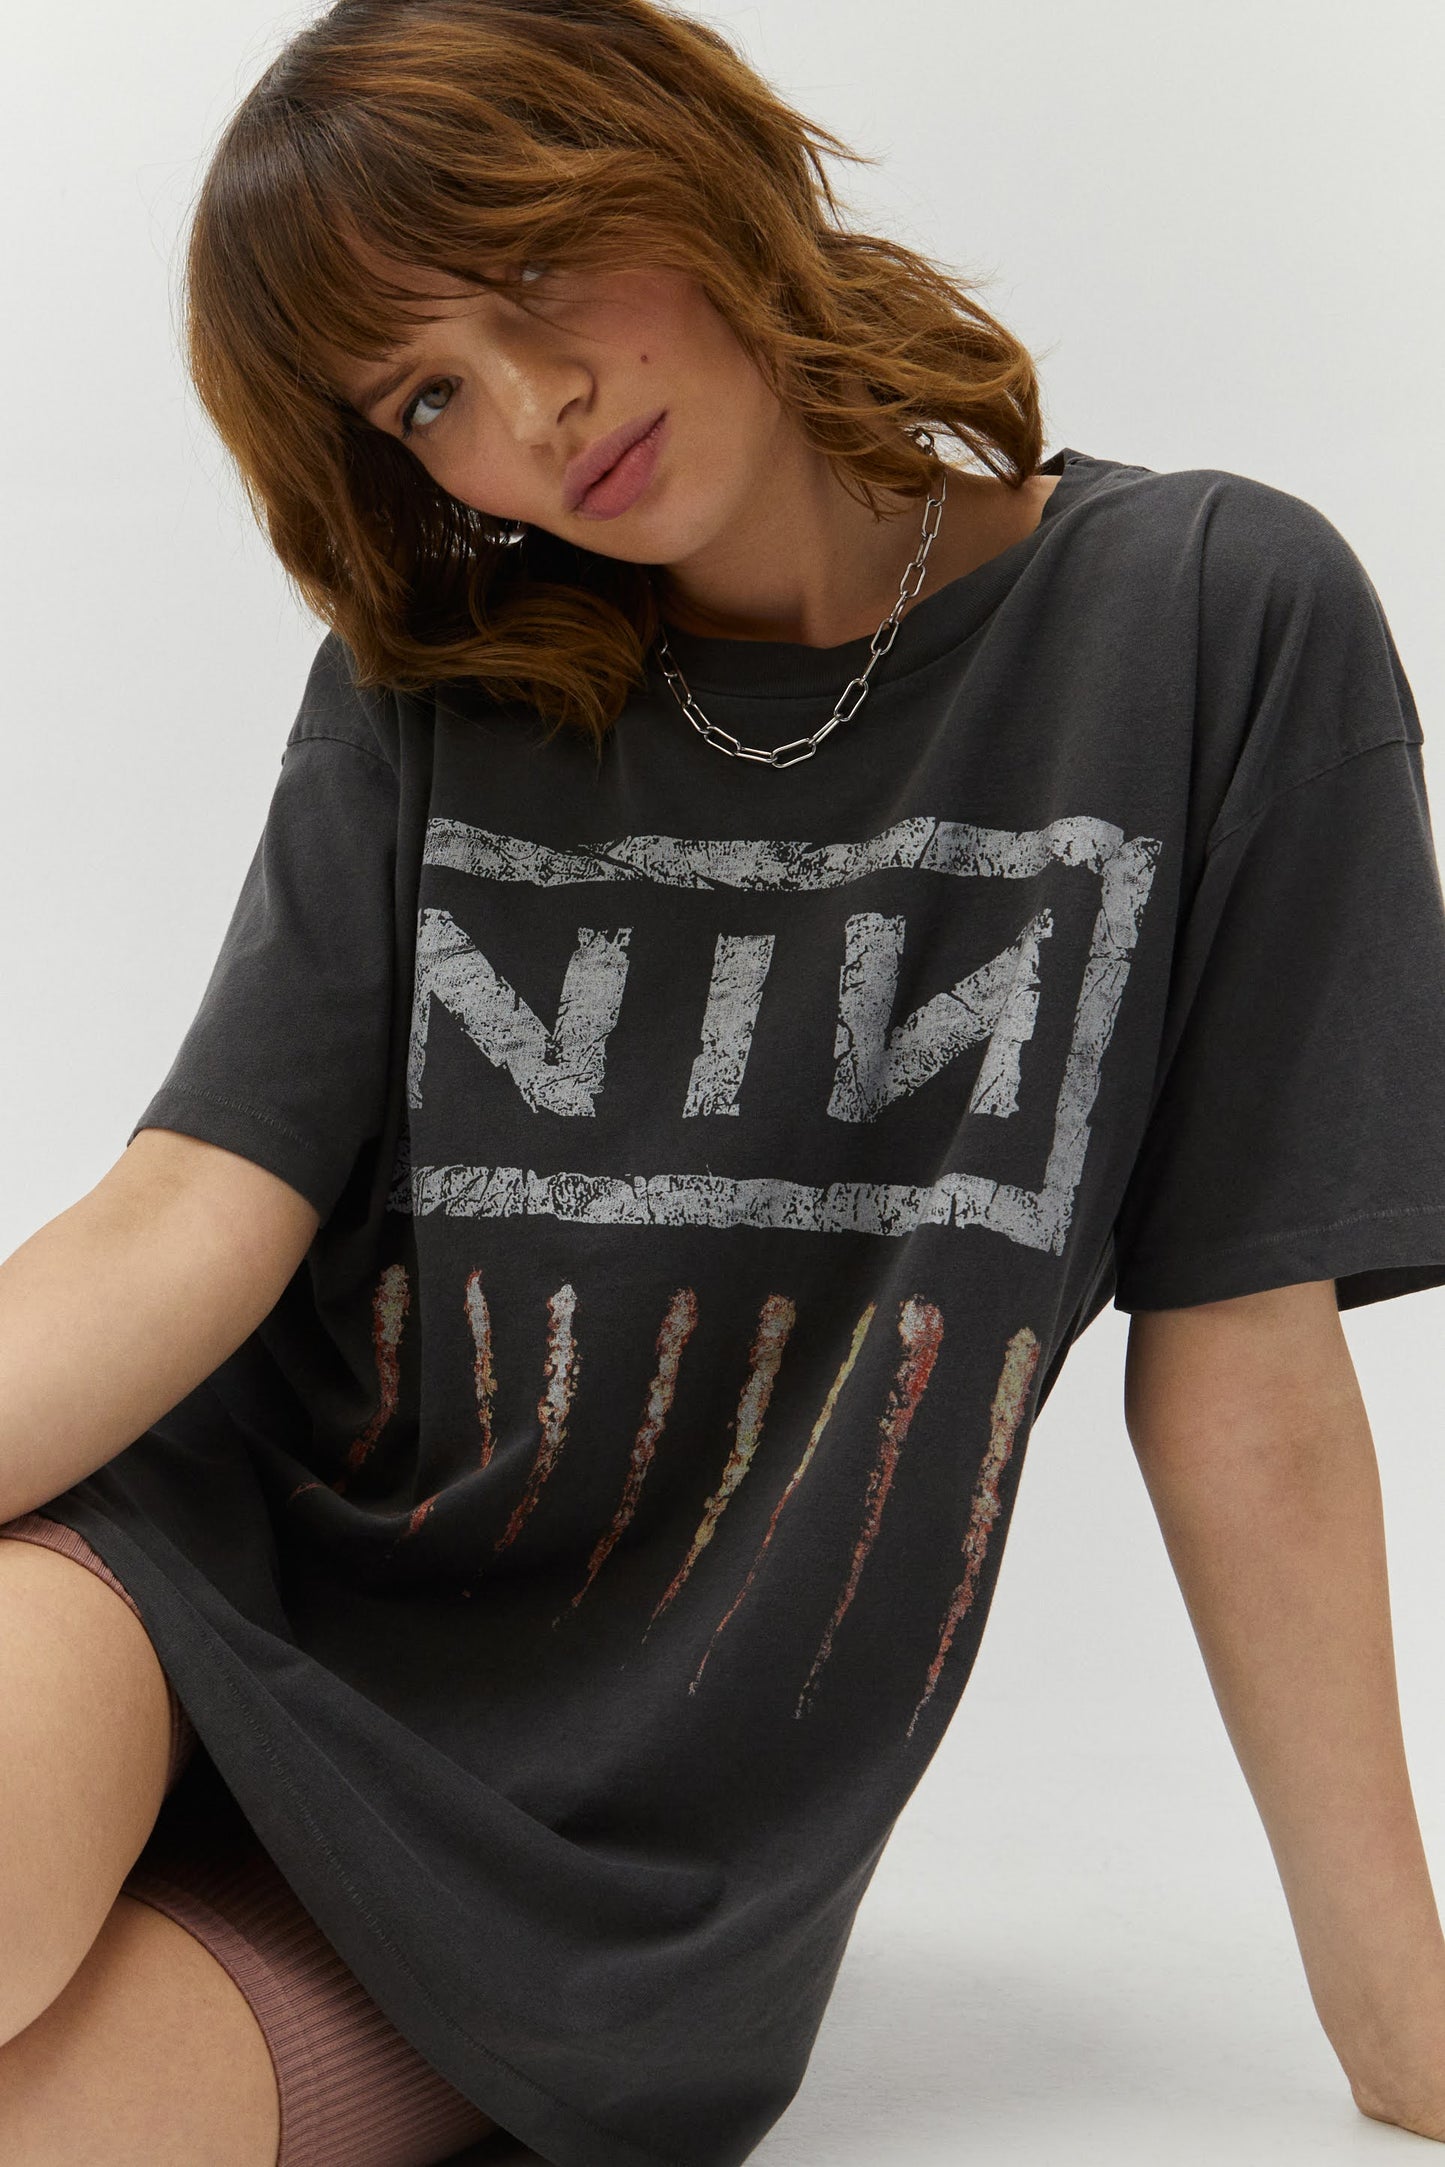 Nine Inch Nails The Downward Spiral Merch Tee